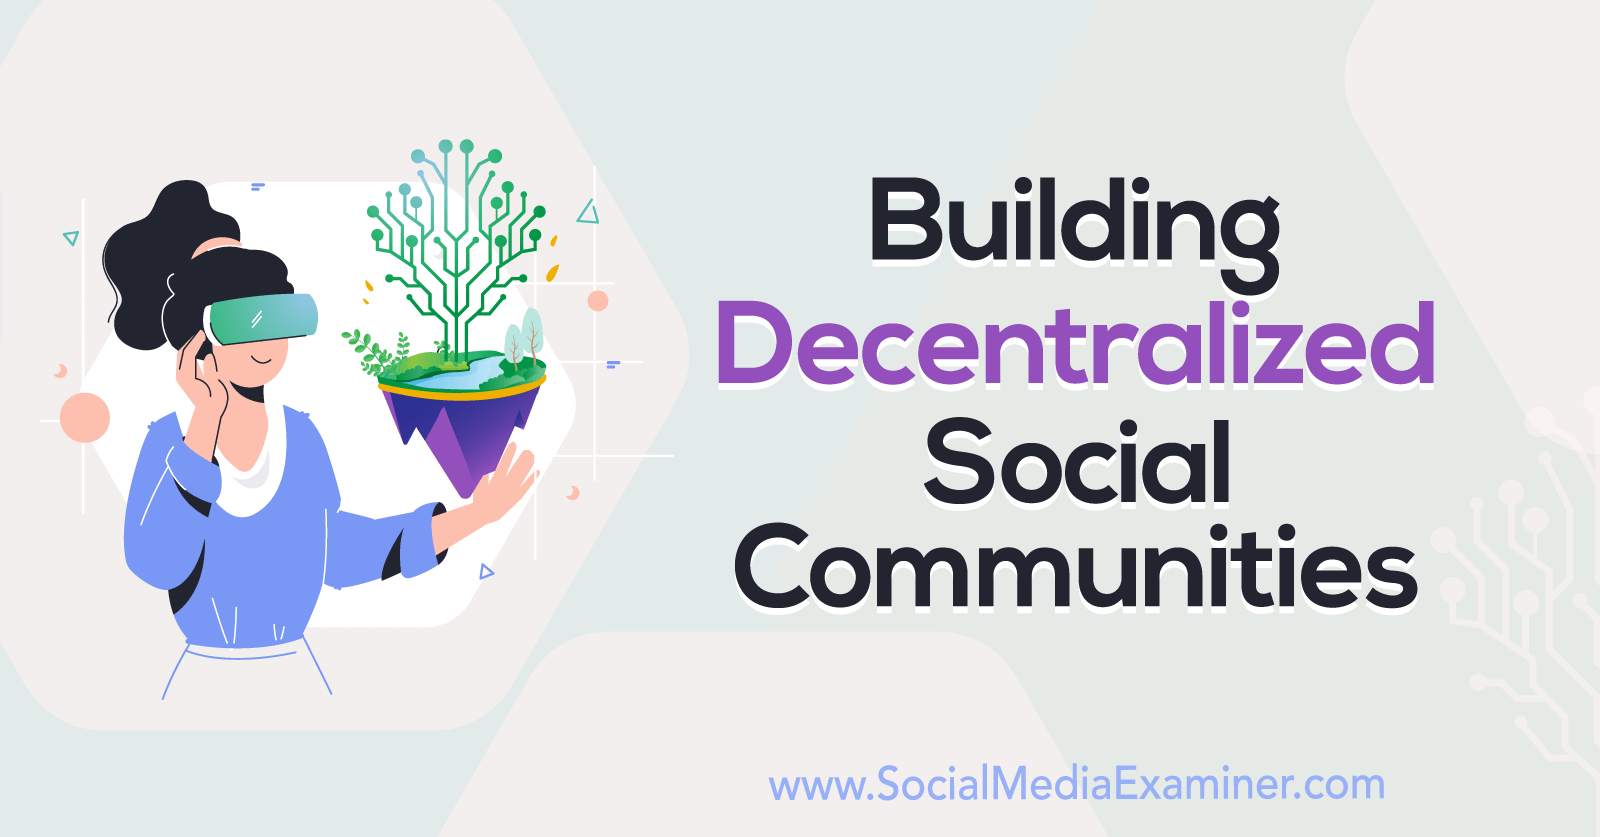 Building Decentralized Social Communities featuring insights from Michael McGuiness on the Crypto Business Podcast.